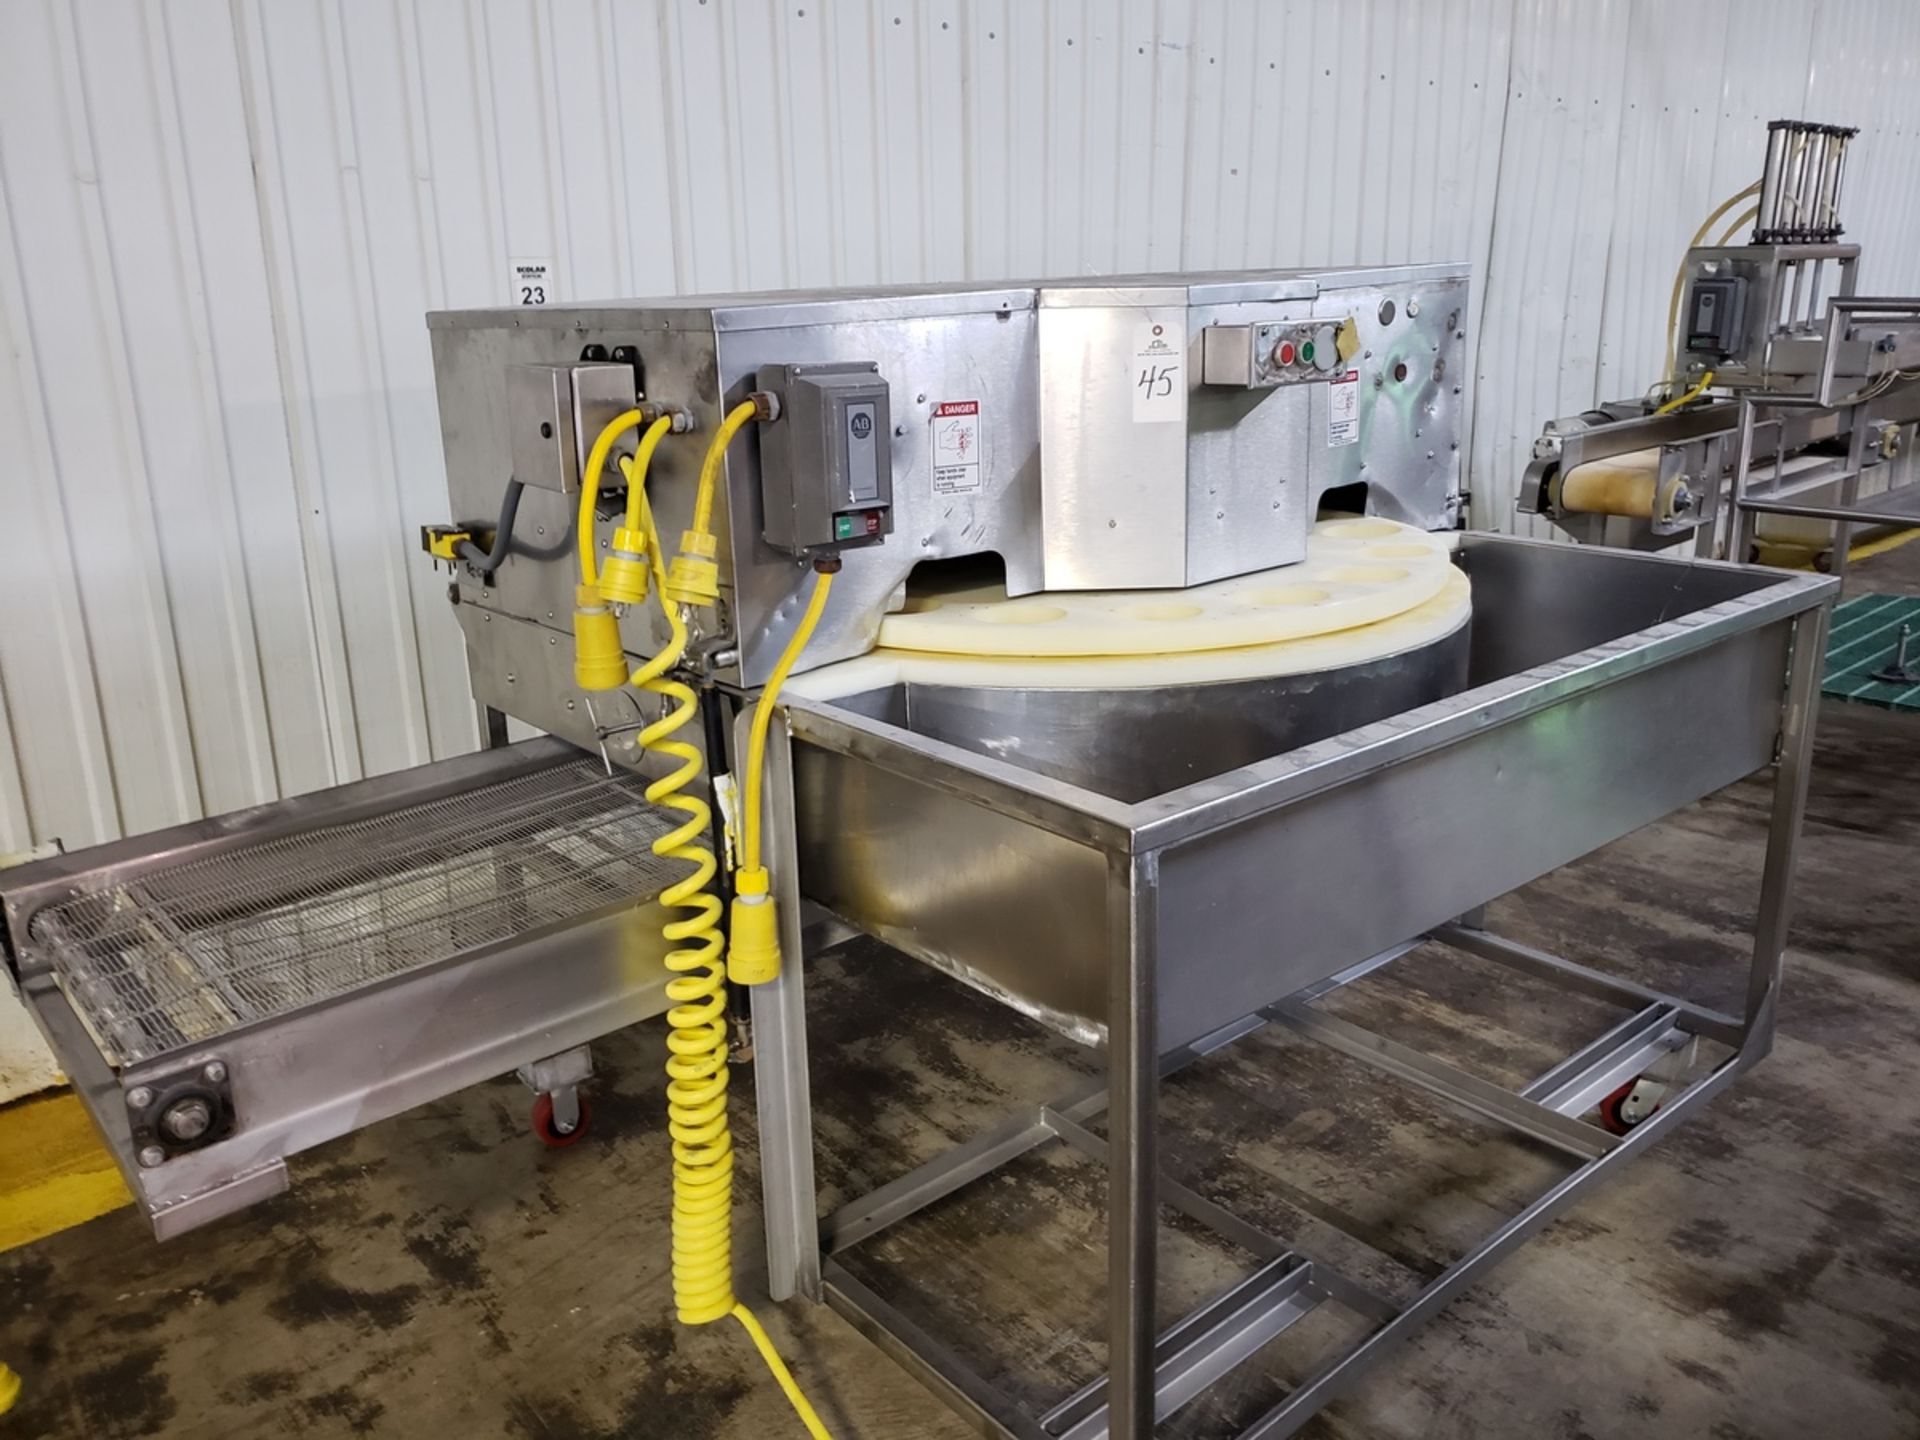 16 Station Carousel Type Continuous Onion Slicer, Dual Blade | Rig Fee: $250